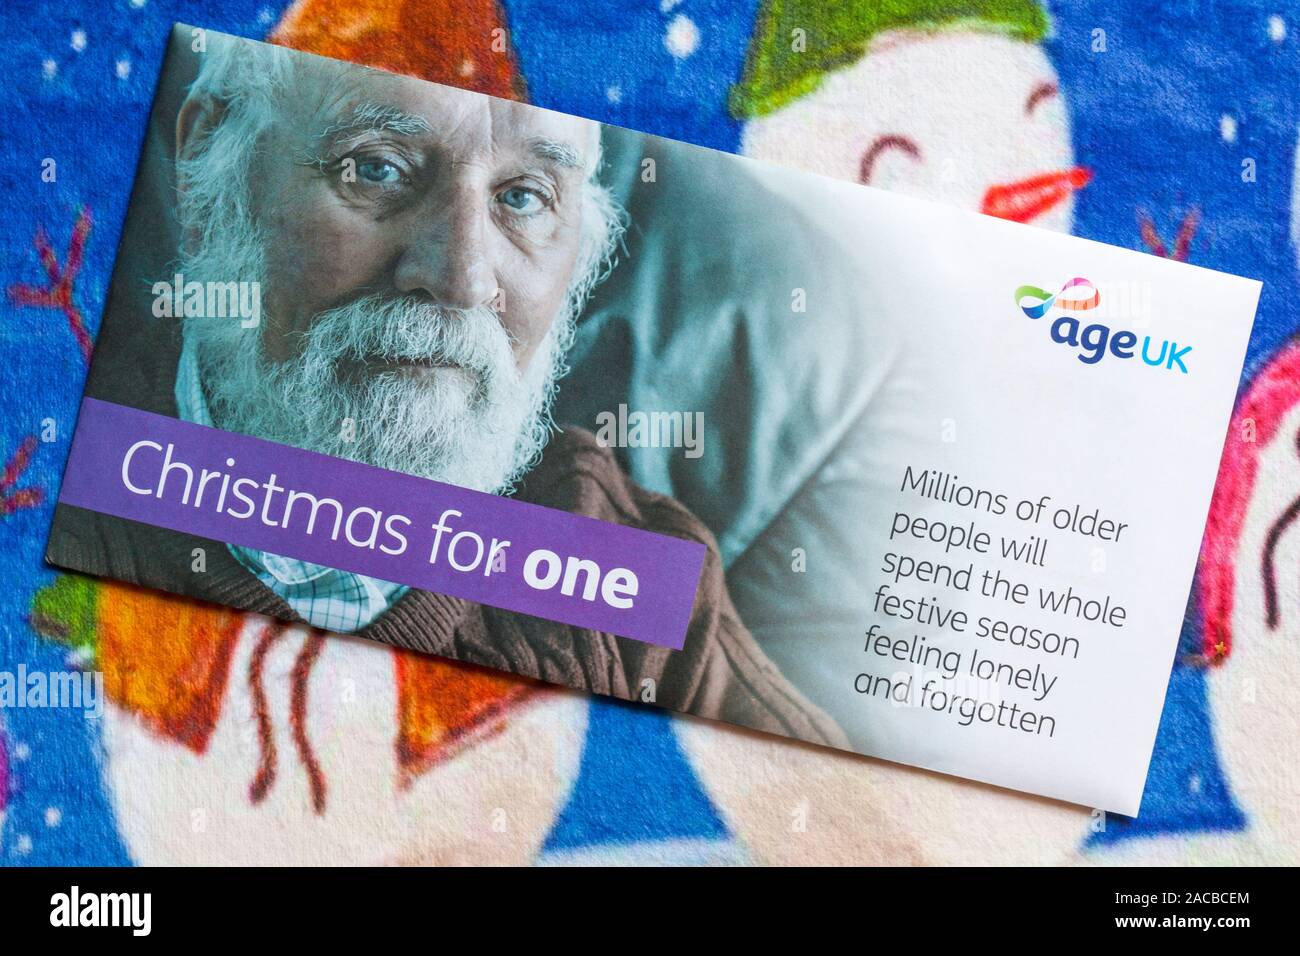 Post on Christmas mat - Christmas for One mail from Age UK, millions of older people will spend the whole festive season feeling lonely and forgotten Stock Photo